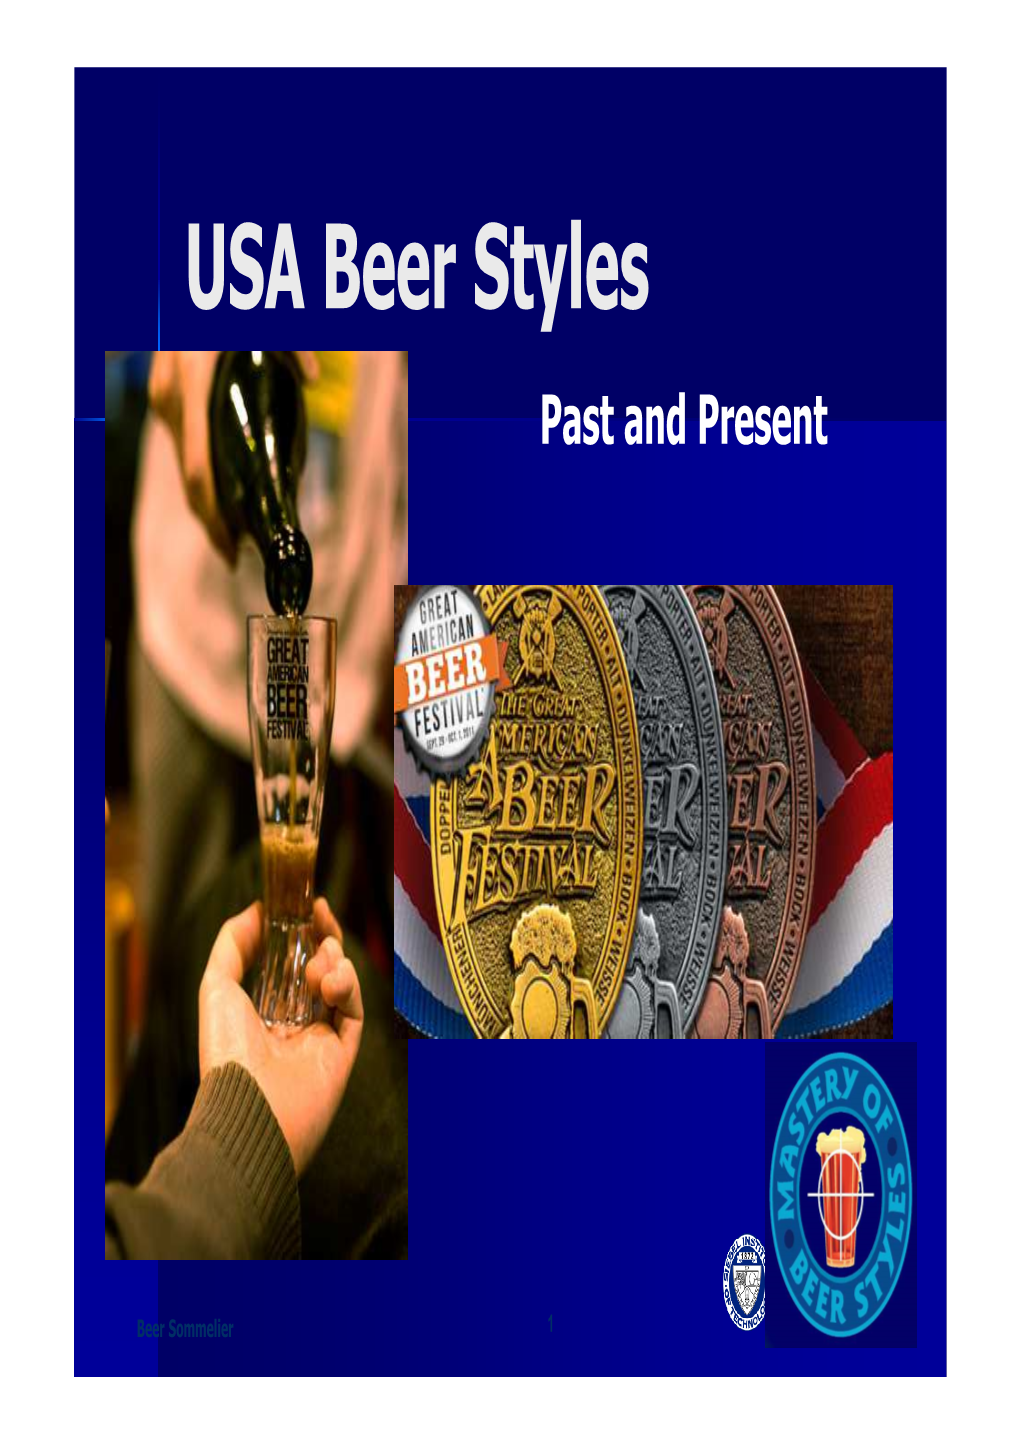 USA Beer Styles Past and Present